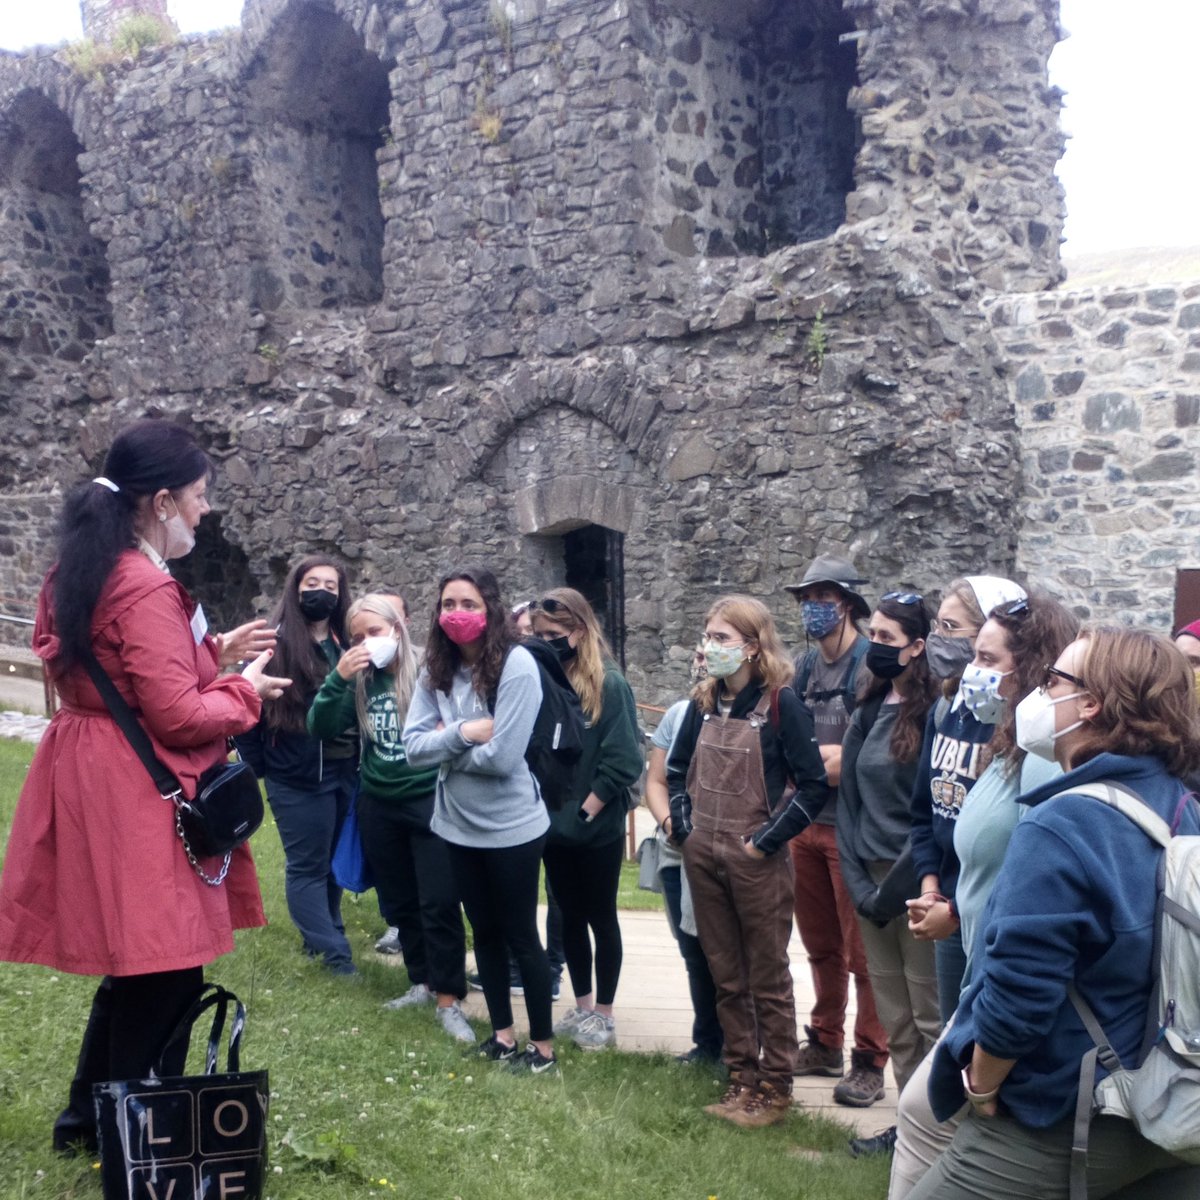 A big thank you to @carlingheritage for welcoming us this morning and for a wonderful tour of King John's Castle 😊 #medievalarchaeology #medievaltown #fieldschool #studyabroad #ireland 🇮🇪